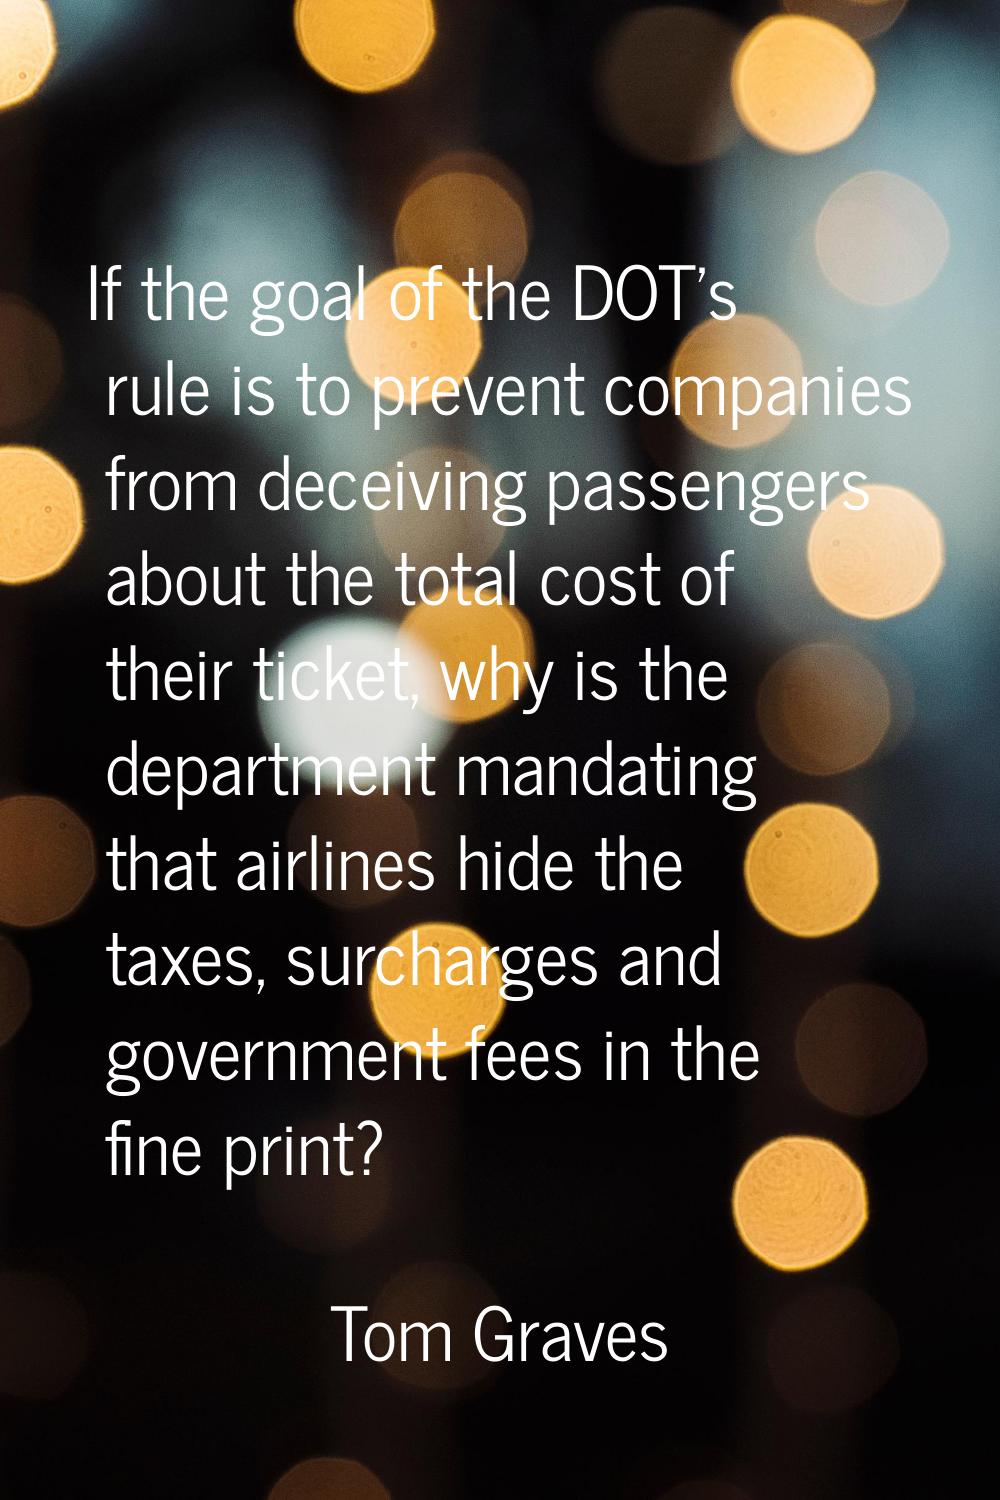 If the goal of the DOT's rule is to prevent companies from deceiving passengers about the total cos